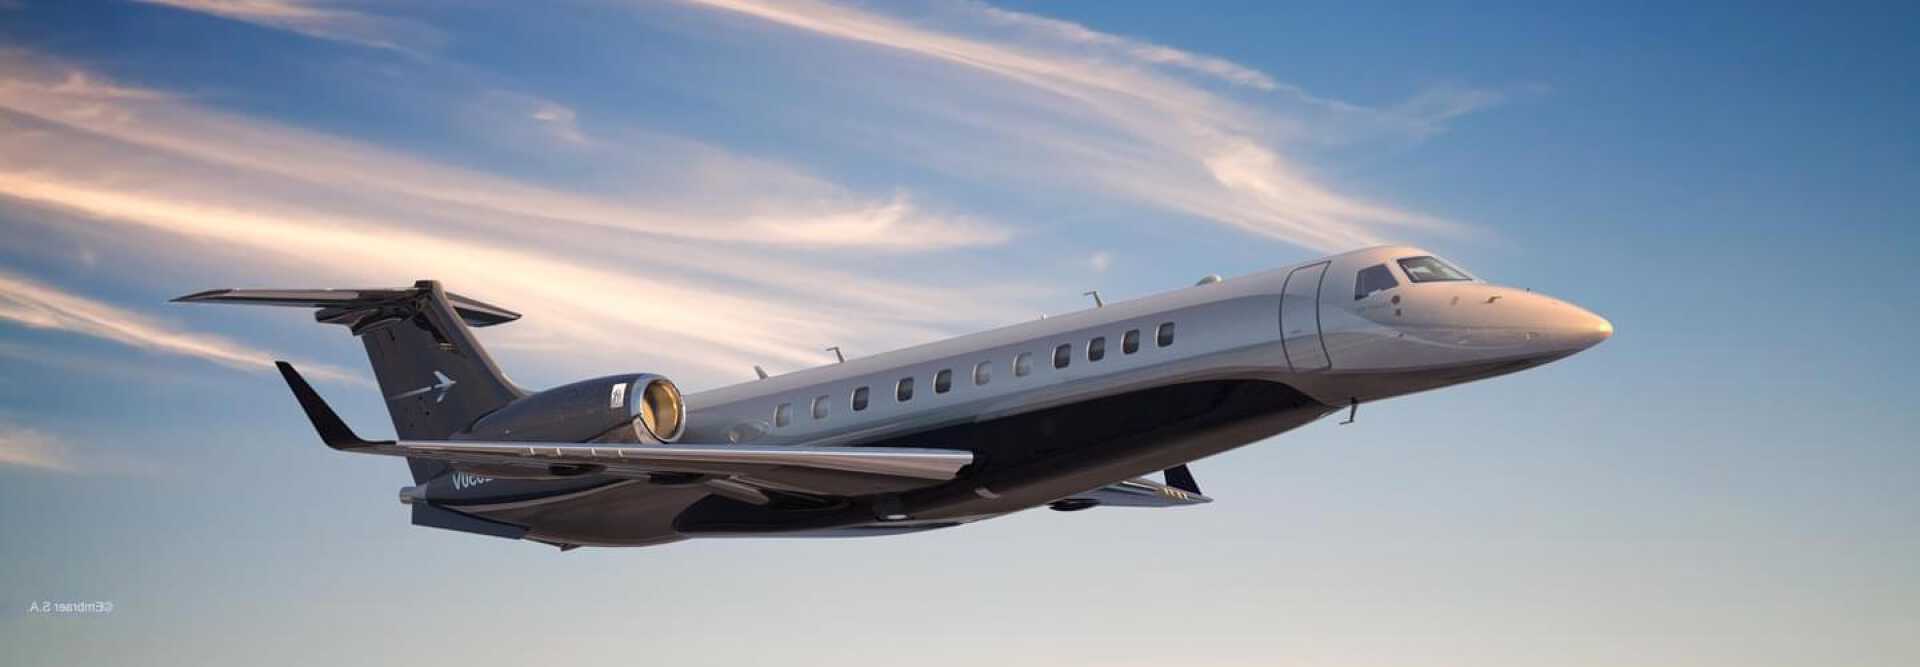 Large Business Jet Embraer Legacy 650 to charter for private aviation flights with LunaJets, fuel efficient, low operating costs, spacious cabin